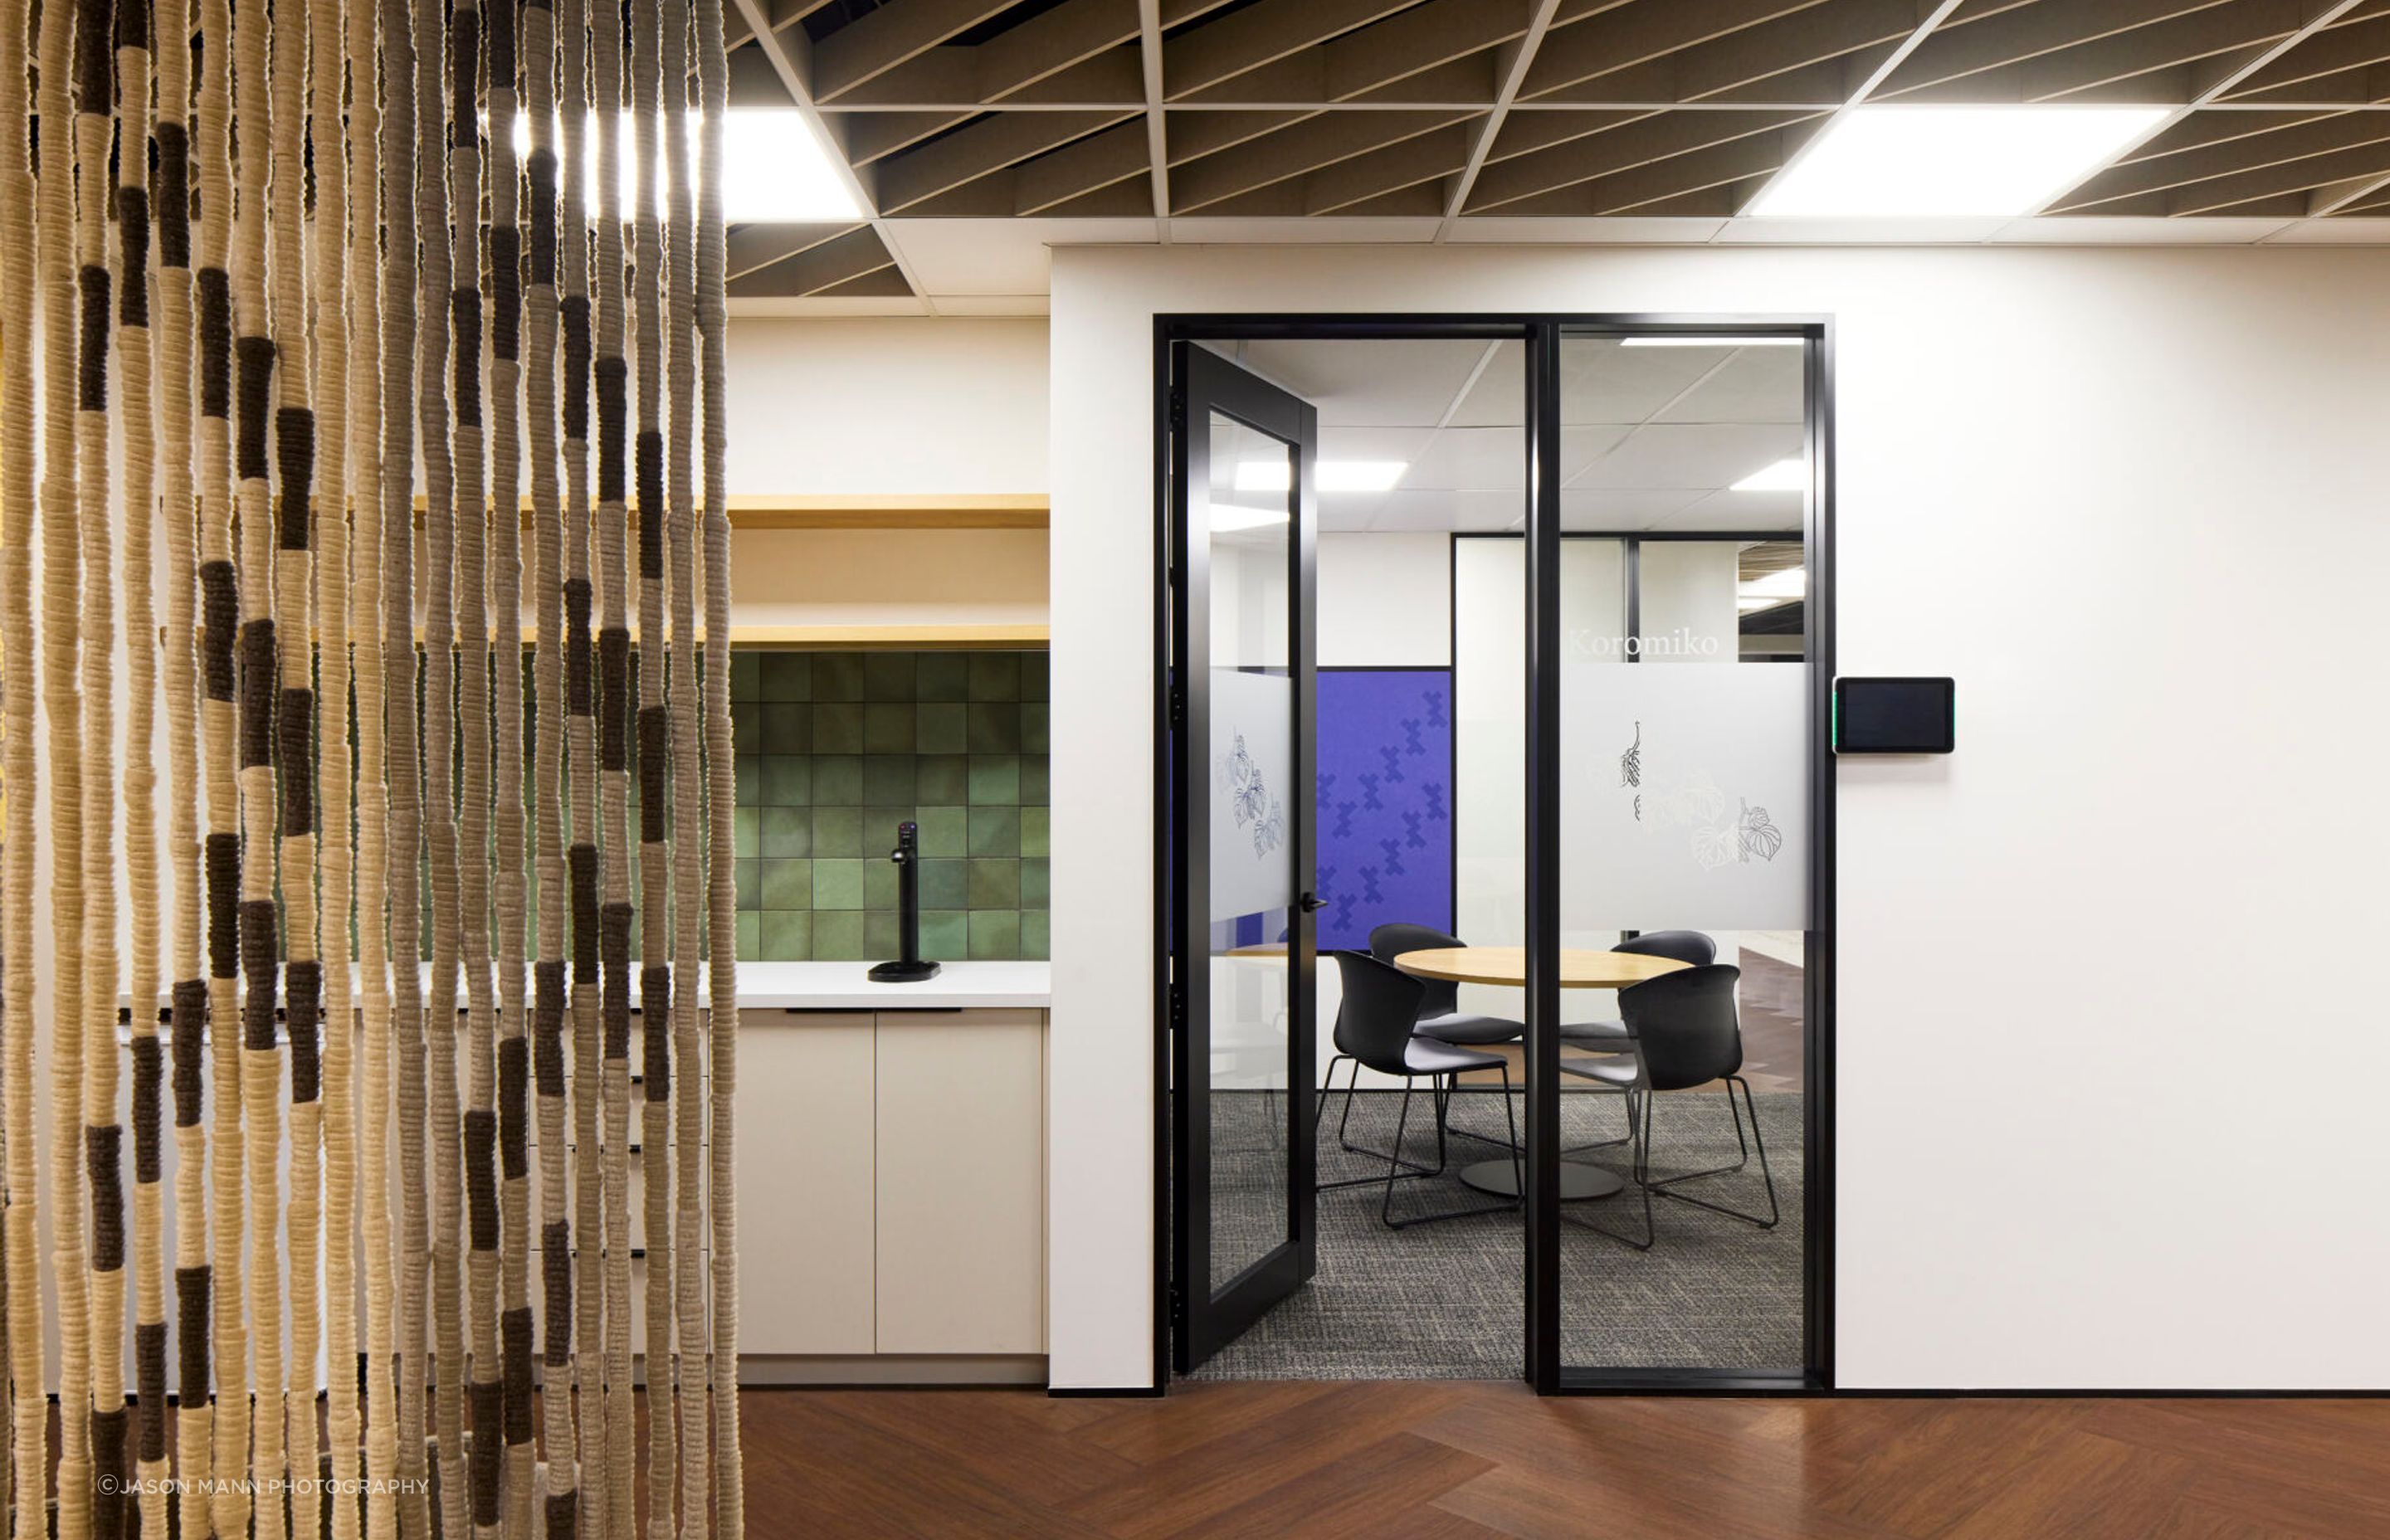 Most meeting rooms feature two doors to improve ease of access and safety, while circular tables promote equality and inclusivity.